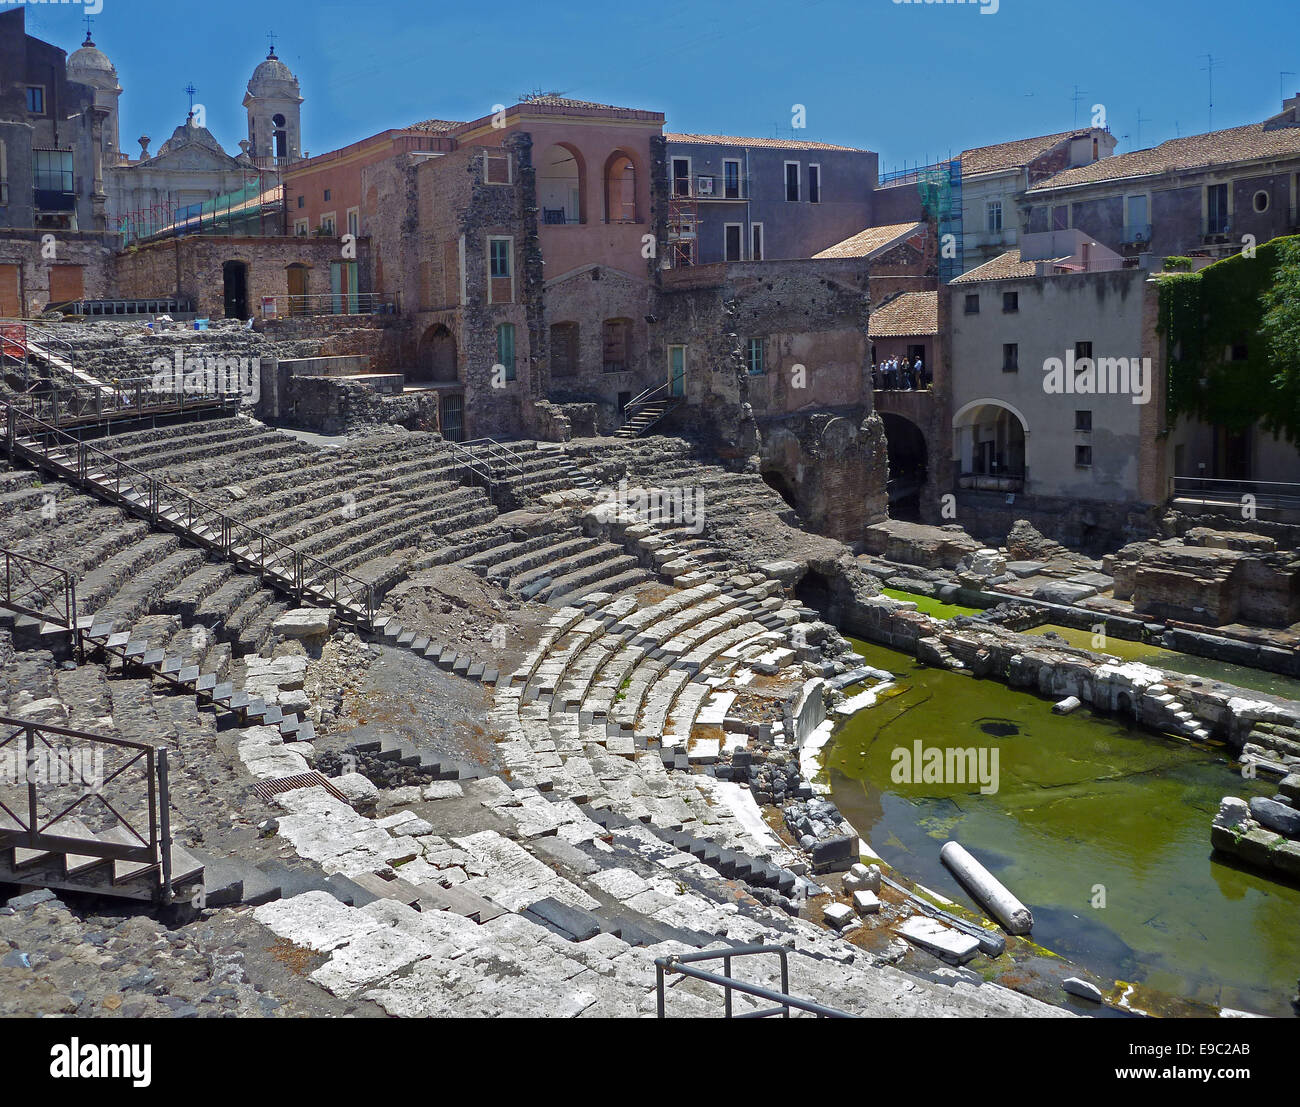 The Roman amphitheater is located on the edge of the ancient Acropolis. It stands on the foundations of ancient Greek theater. Good condition, the rooms are in the basement. A stream provides today water was needed for water games. - June 2014 Stock Photo